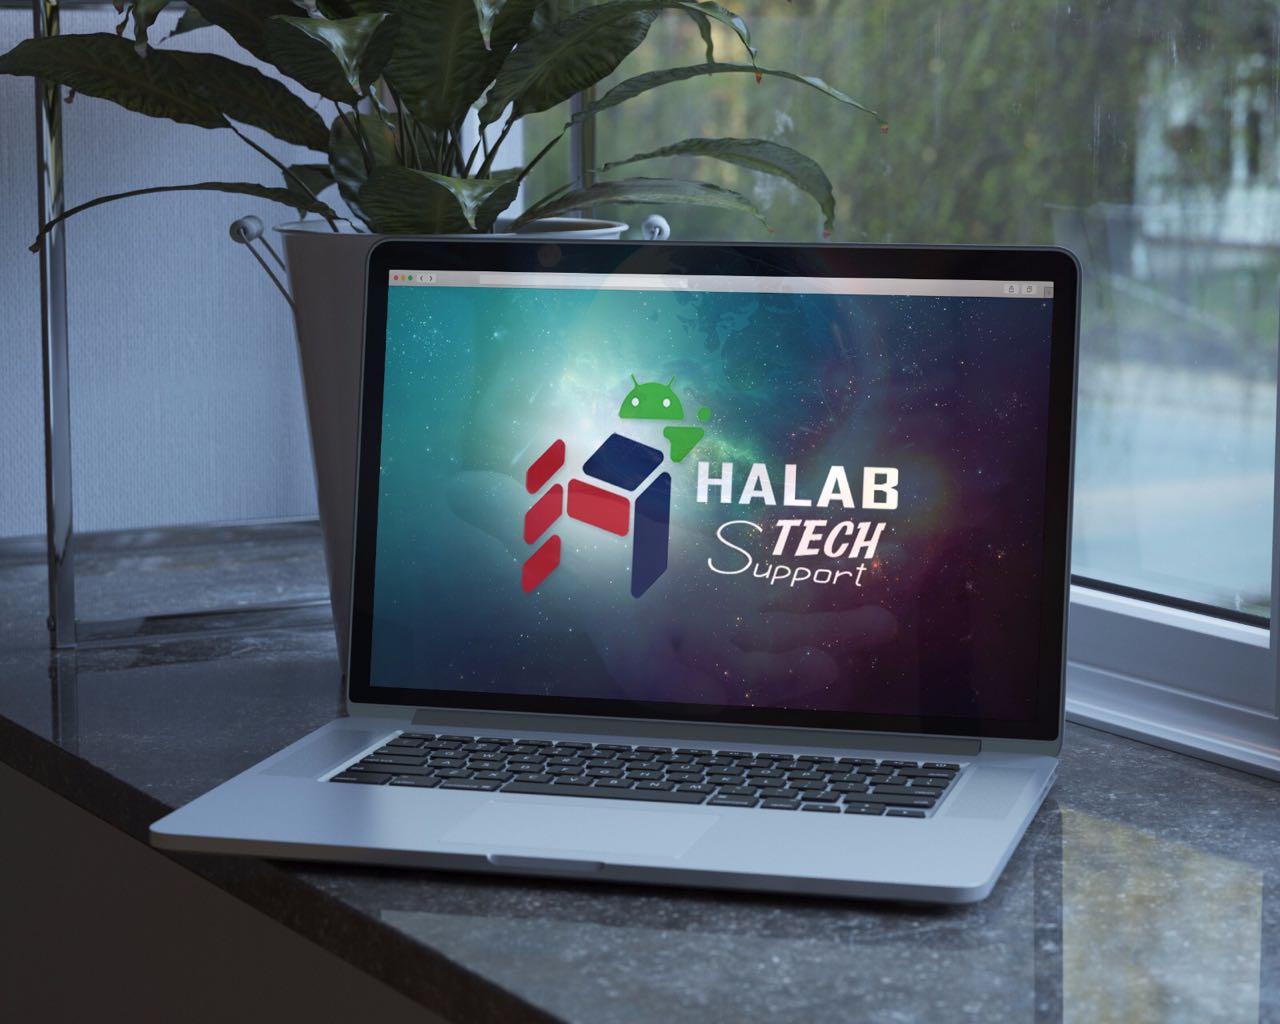 How To Register On Halab Tech Support